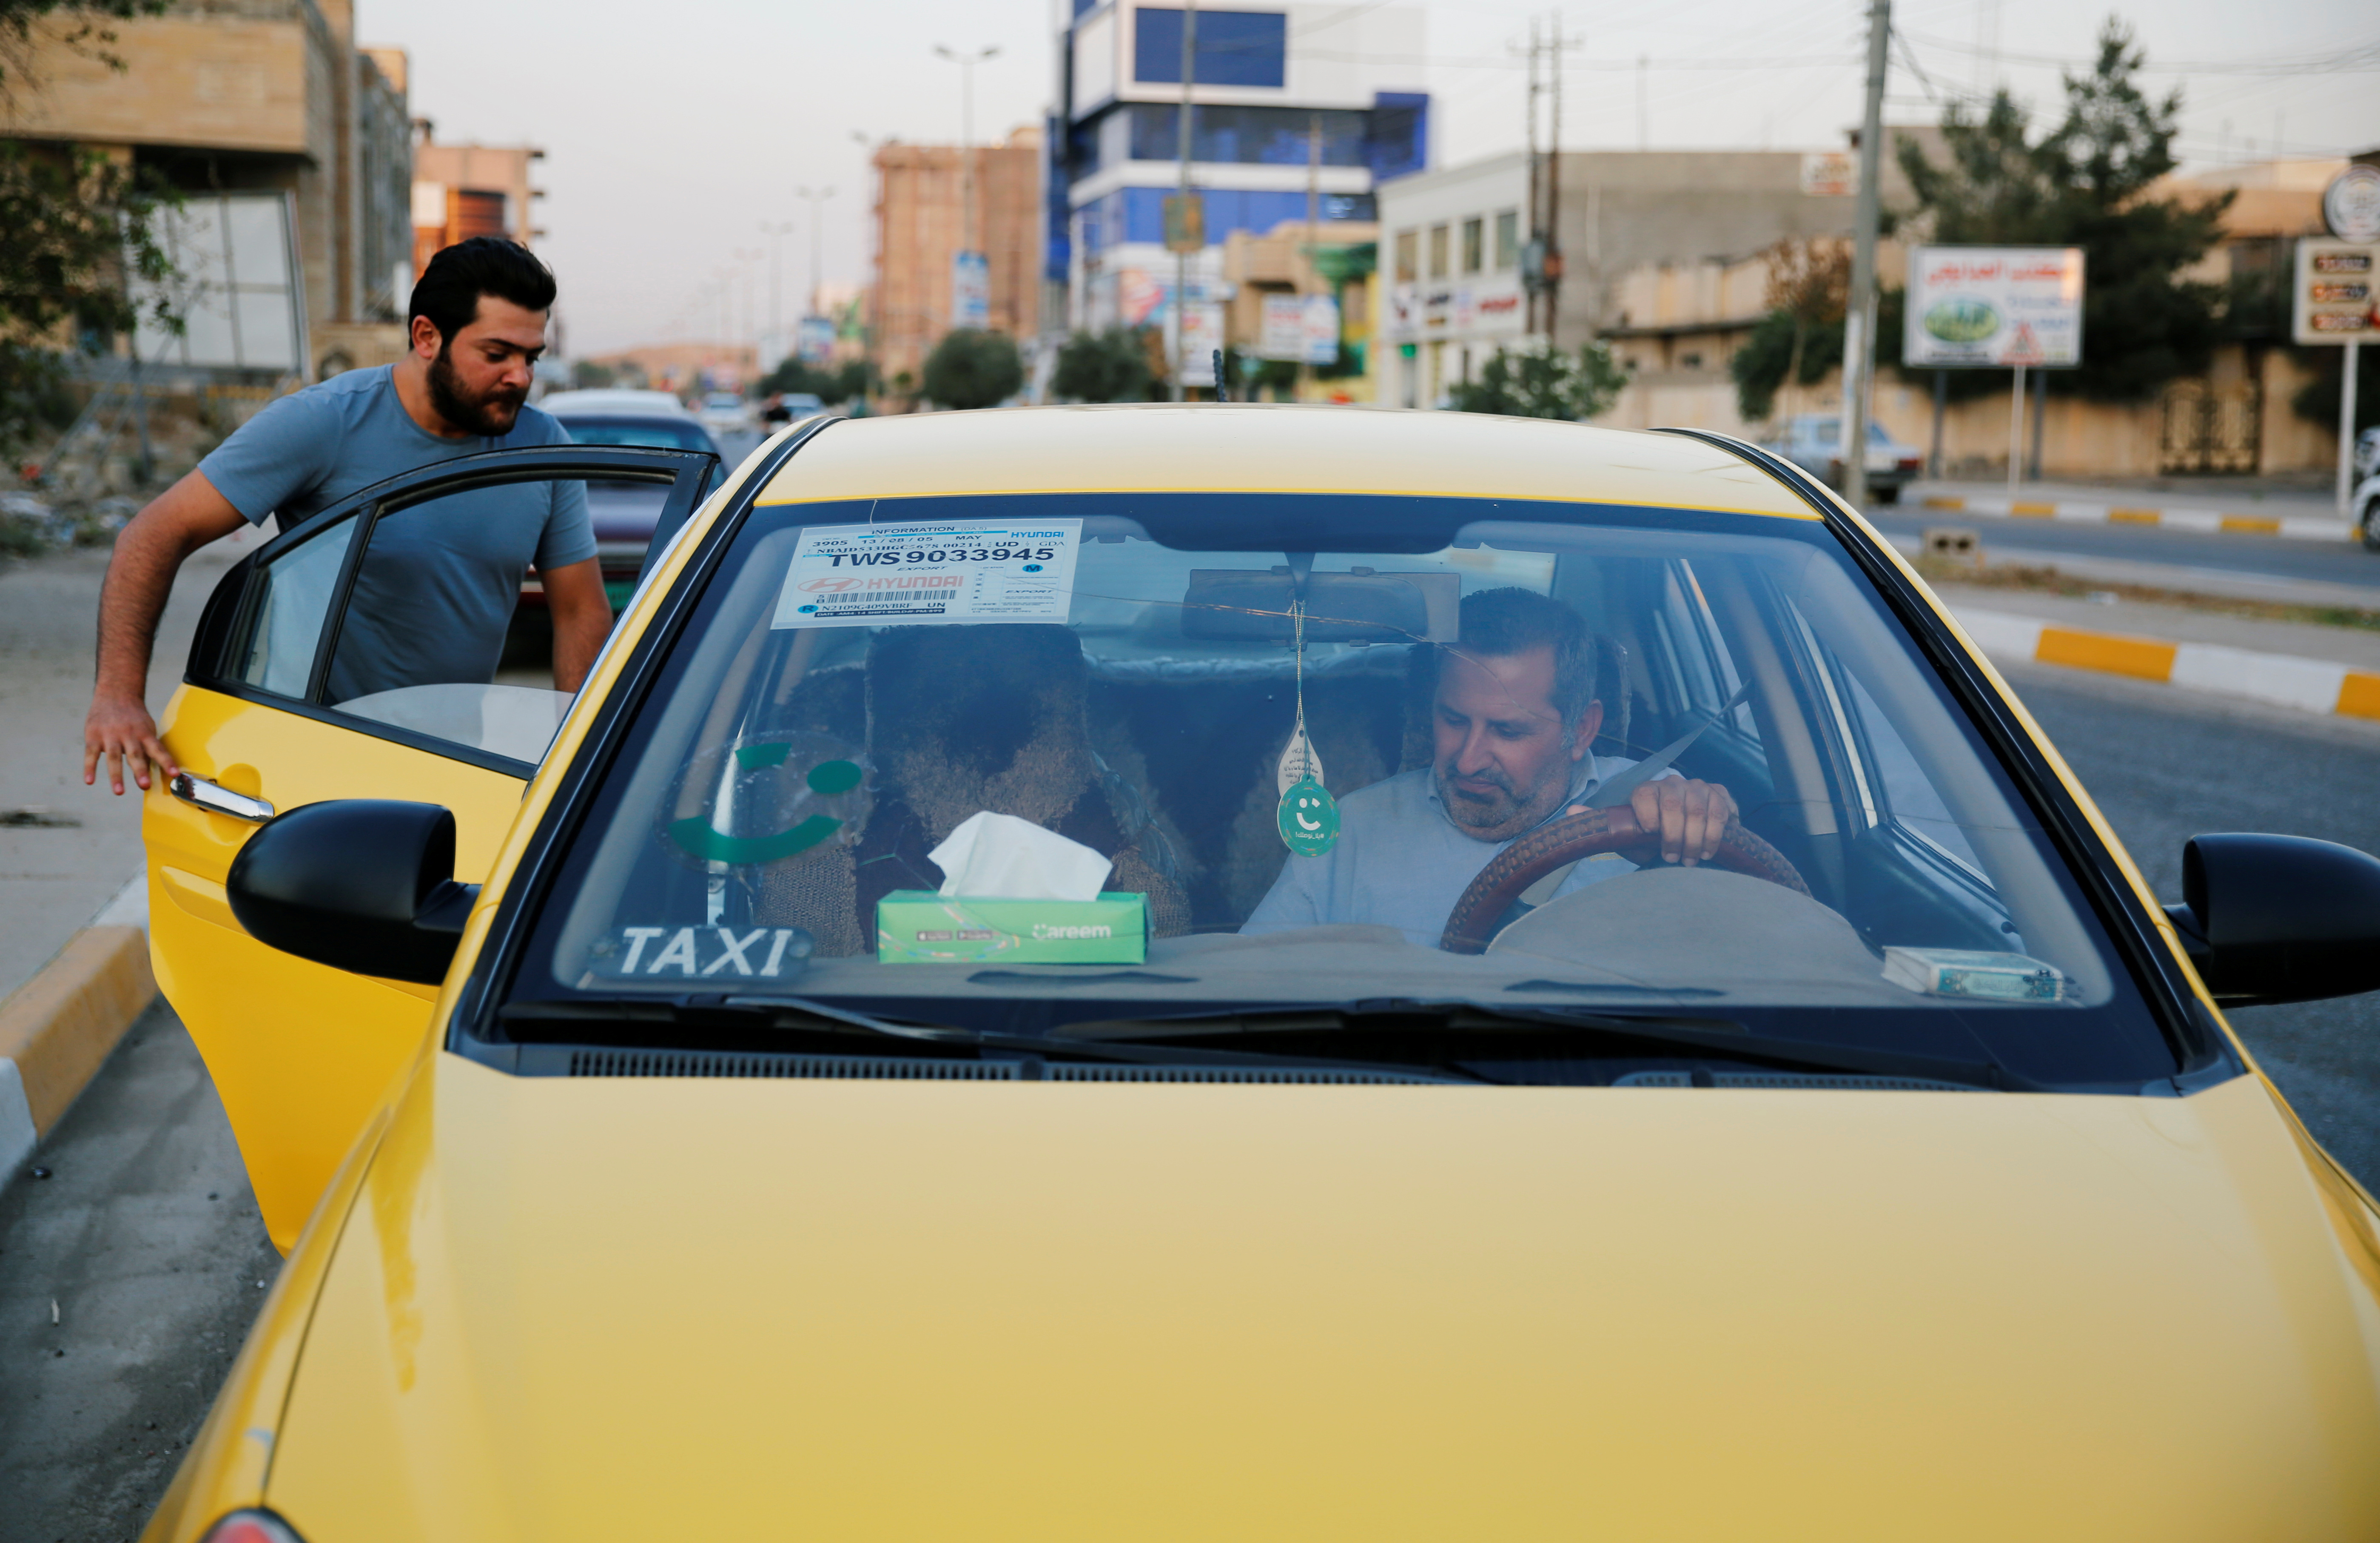 A customer enters one of Careem cars in Mosul